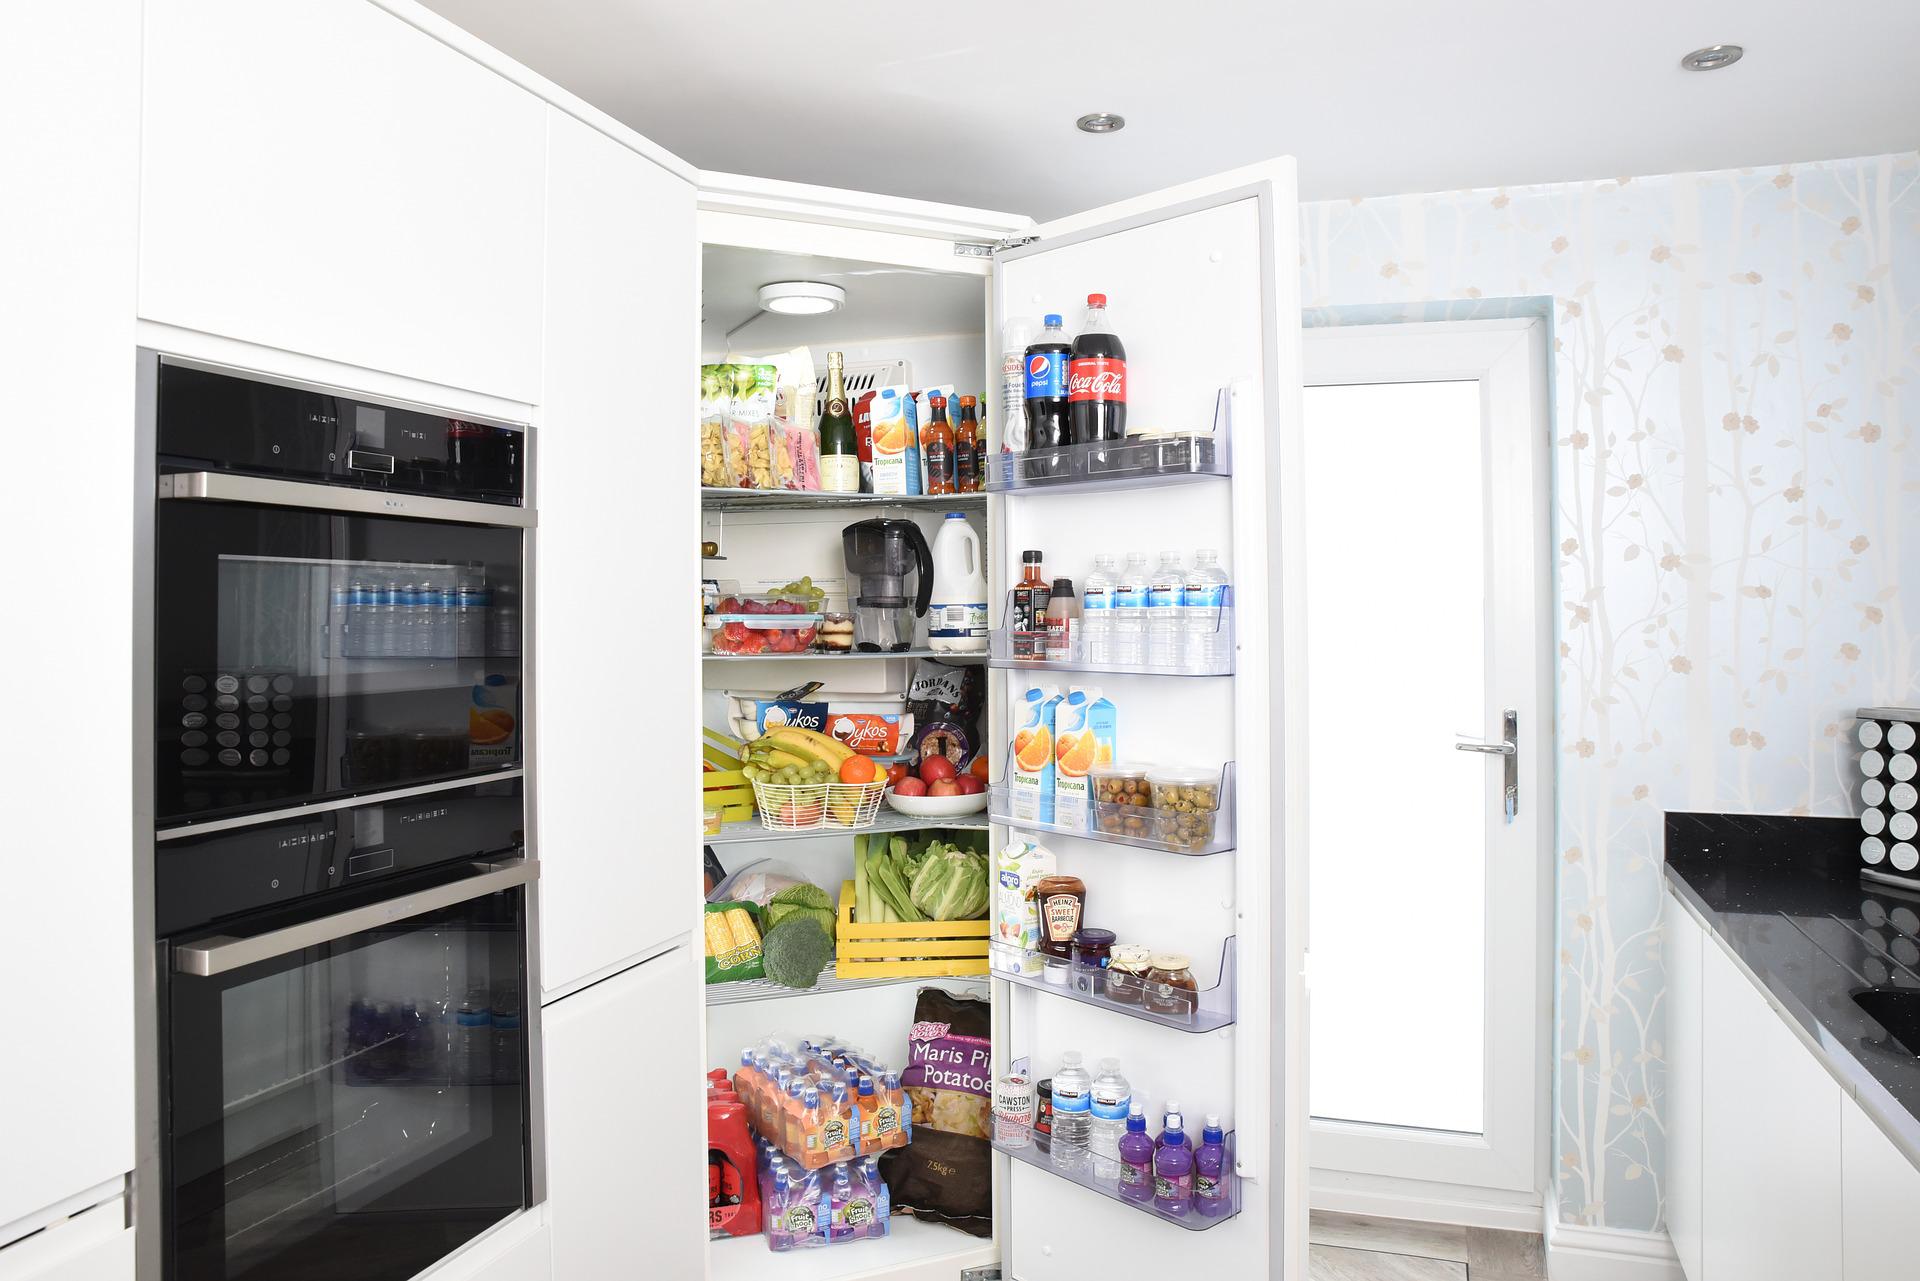 fridge g9c3f0b6b2 1920 Cold Chain Traceability System Tackles Food, Pharmaceutical Waste